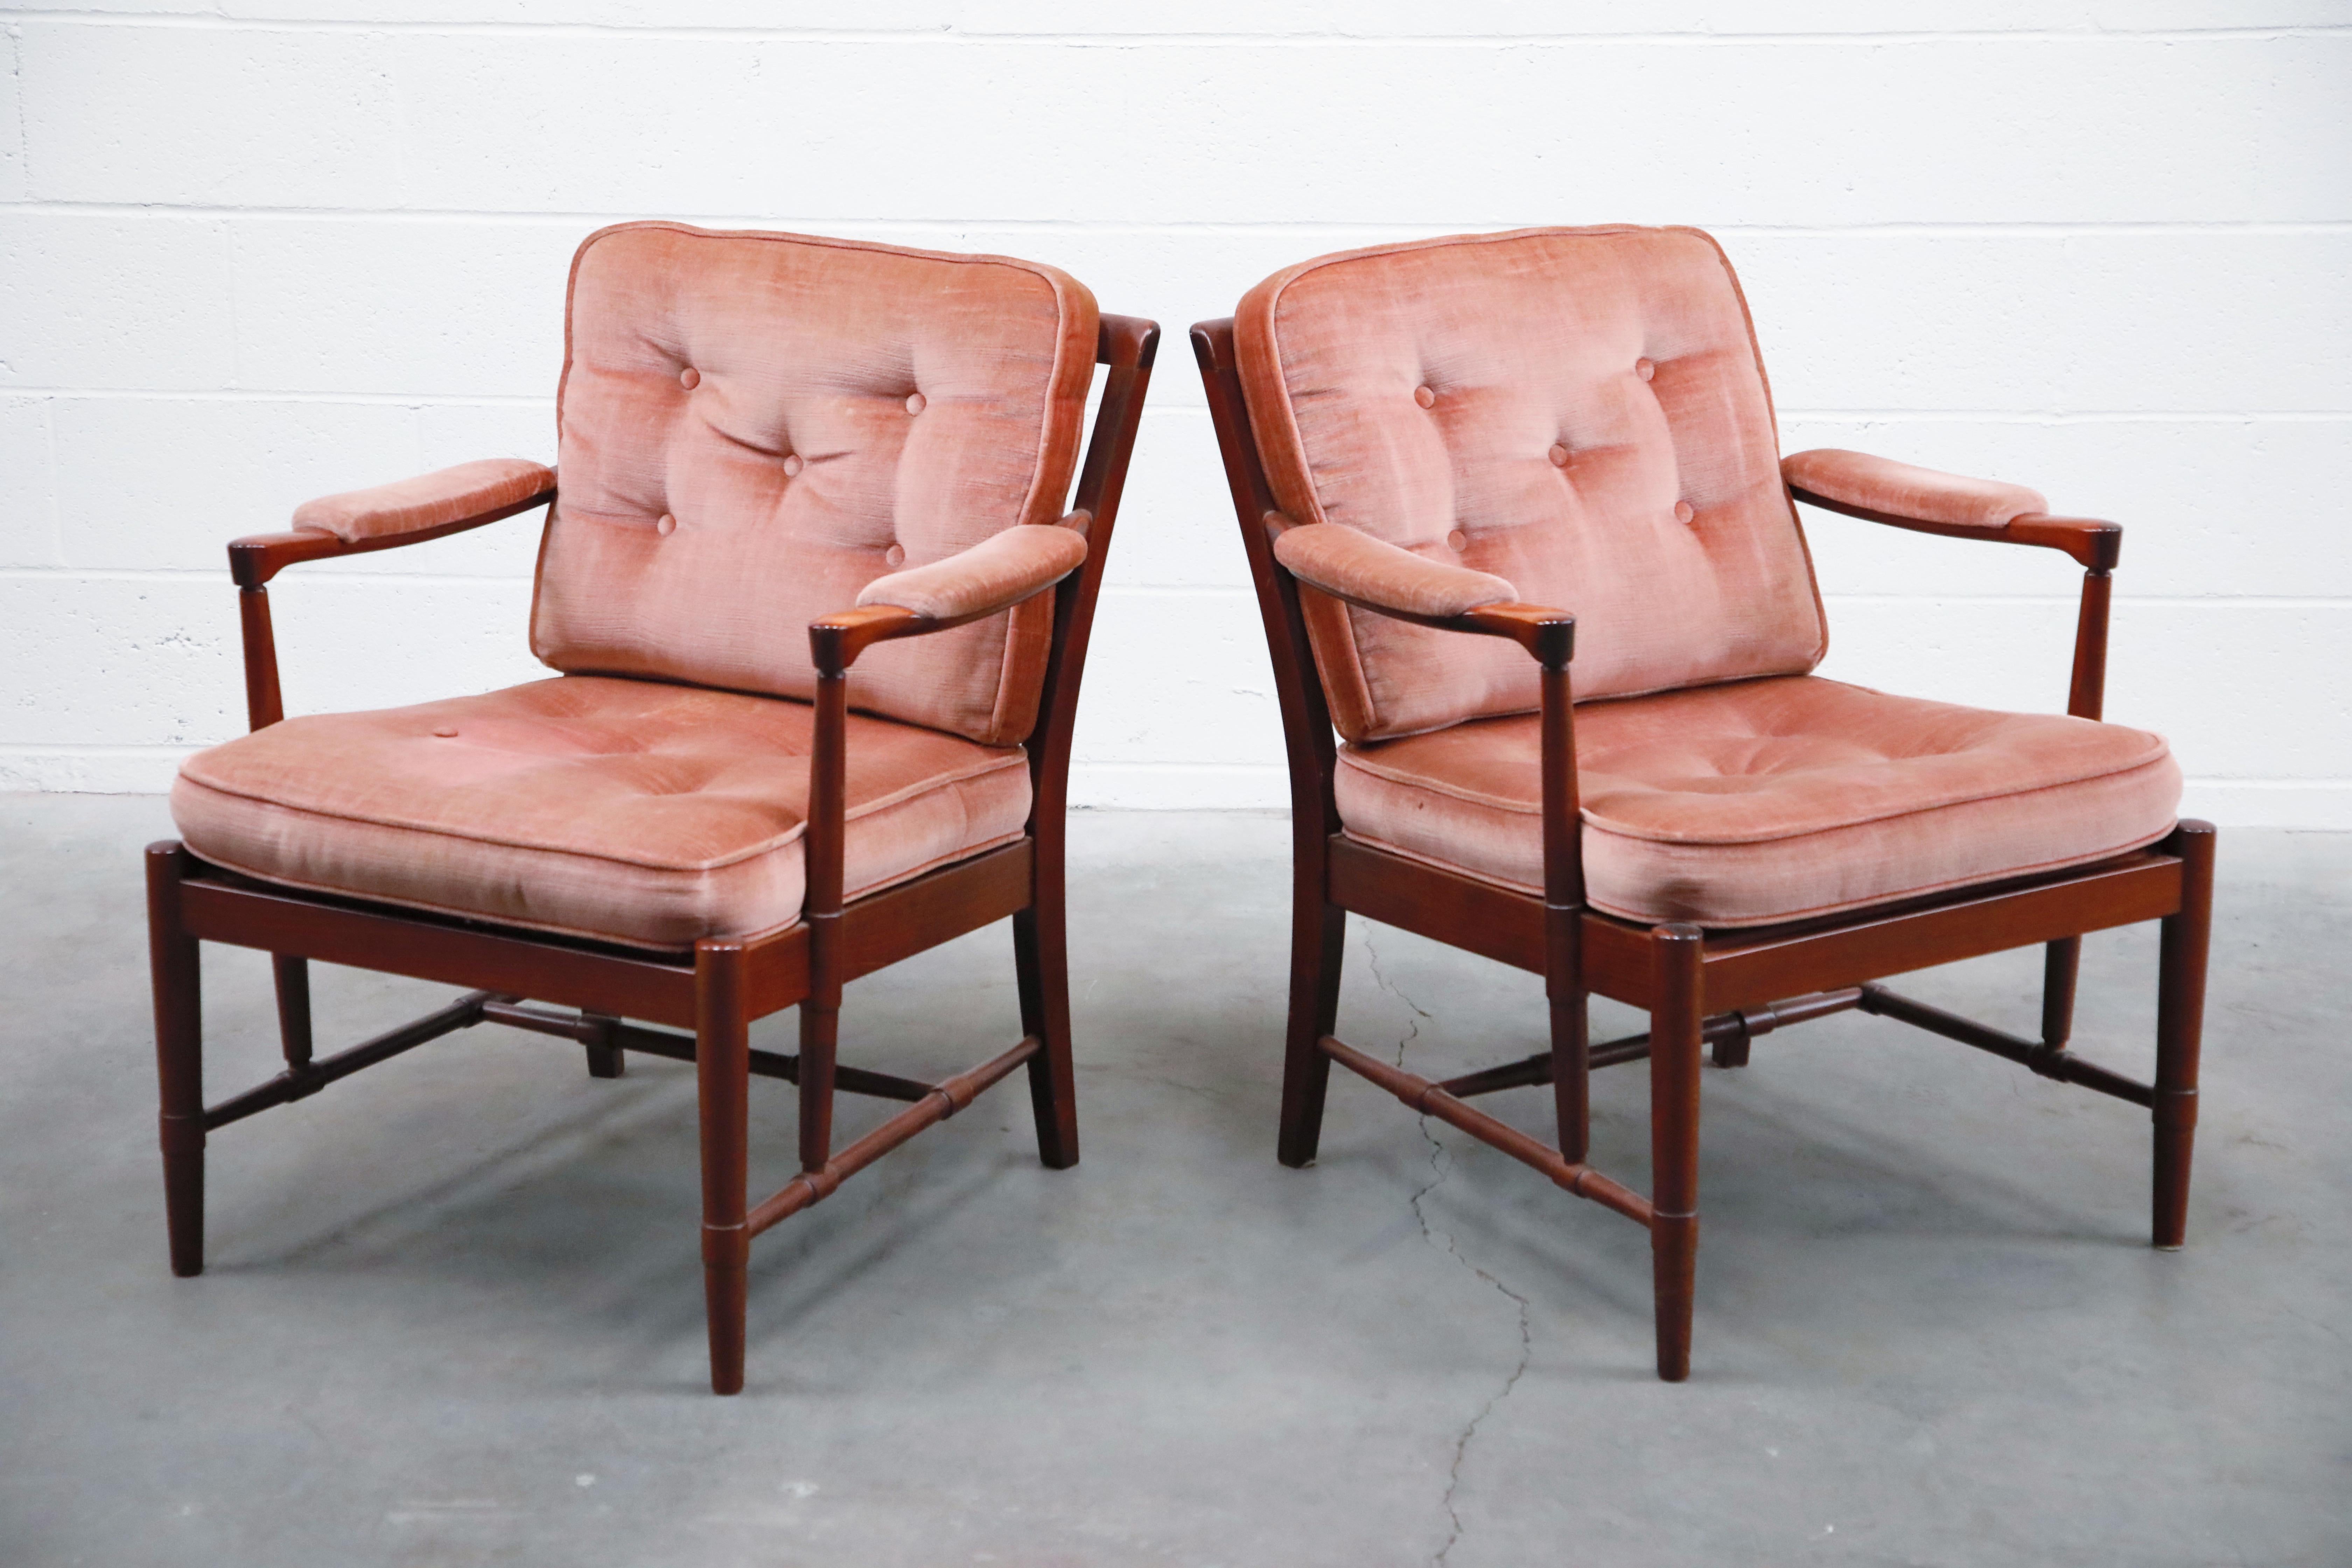 An incredible pair of Danish modern rosewood and pink velvet armchairs by Aksel Sorensen Mobler. These 1970s Denmark lounge chairs feature sculpted wood with beautiful rosewood grain and design features including sculpted arms, innovative turned